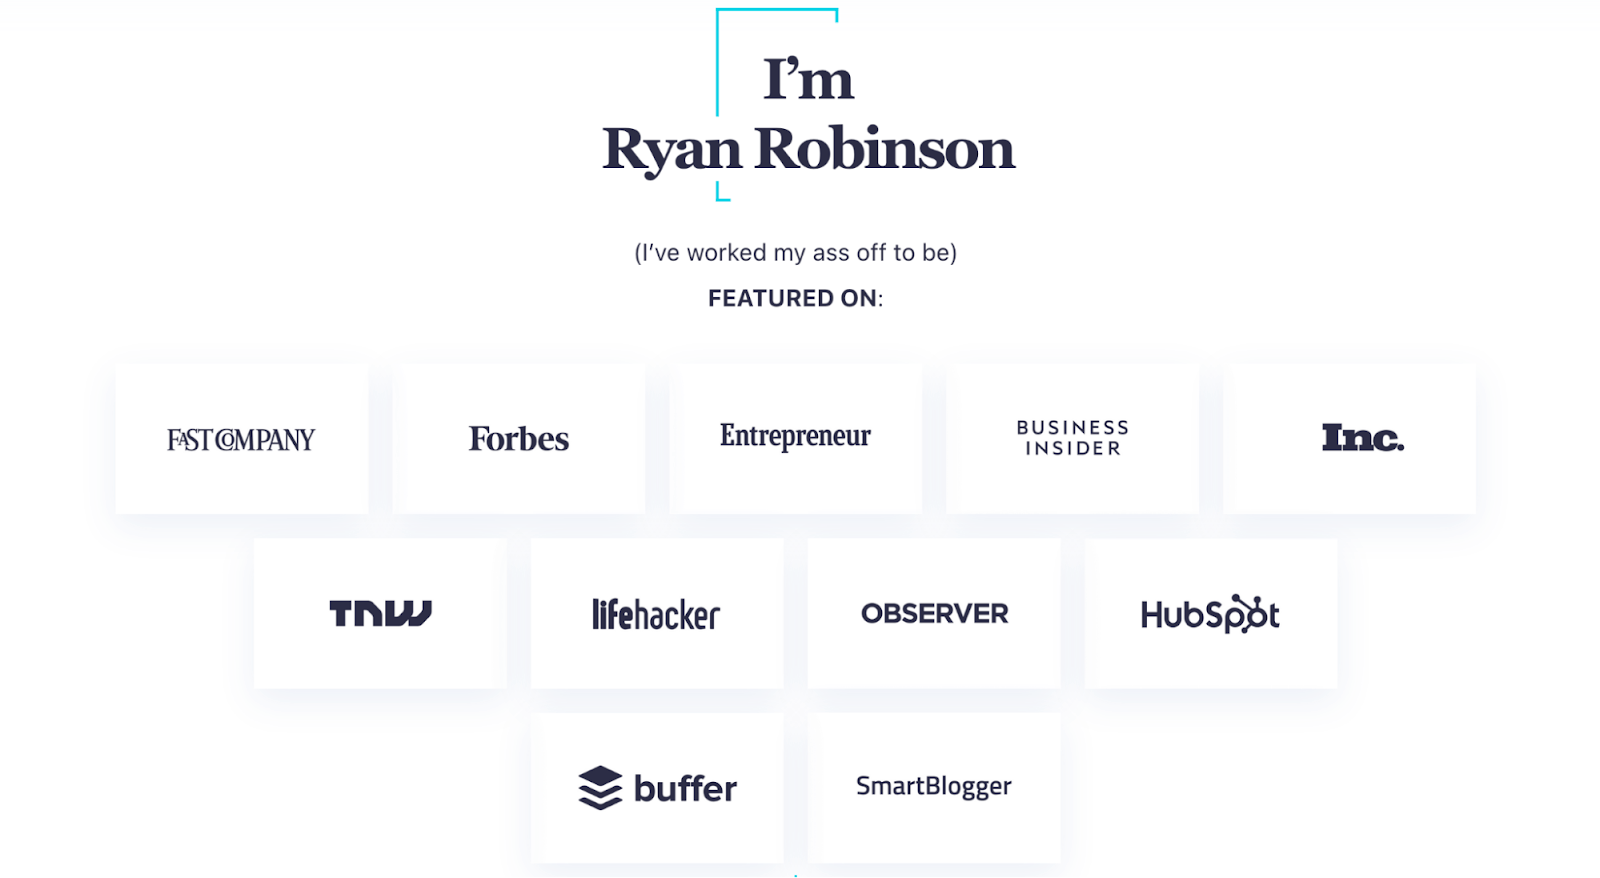 Publications (in grid format) that Ryan Robinson is featured on